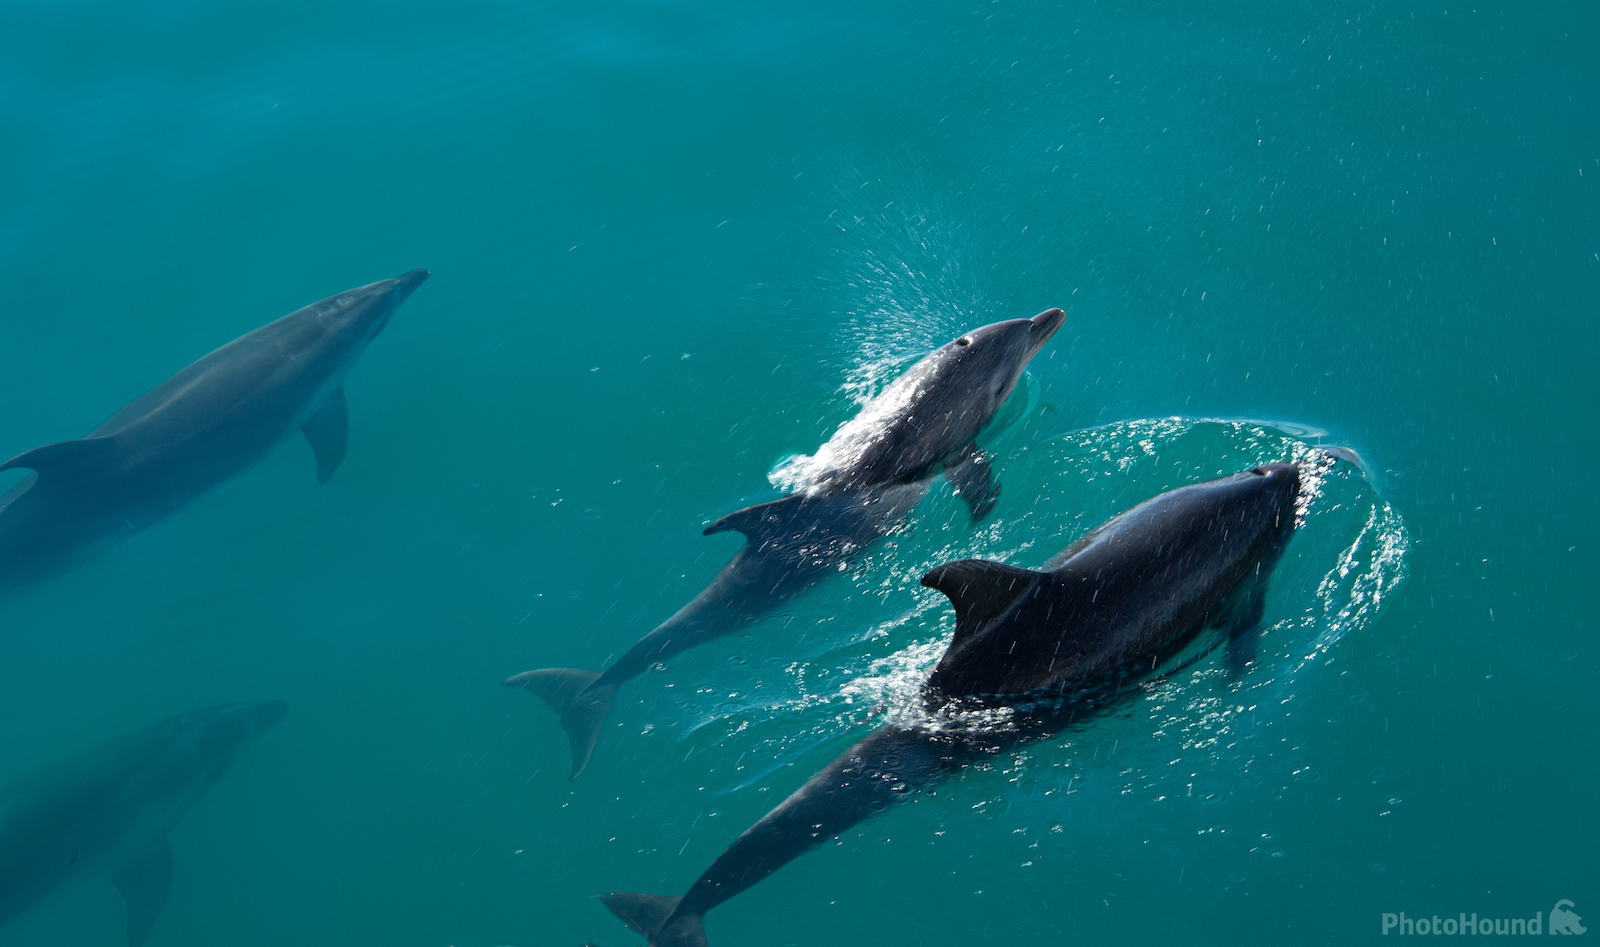 Image of Bay of Islands Dolphins by Alan Crozier